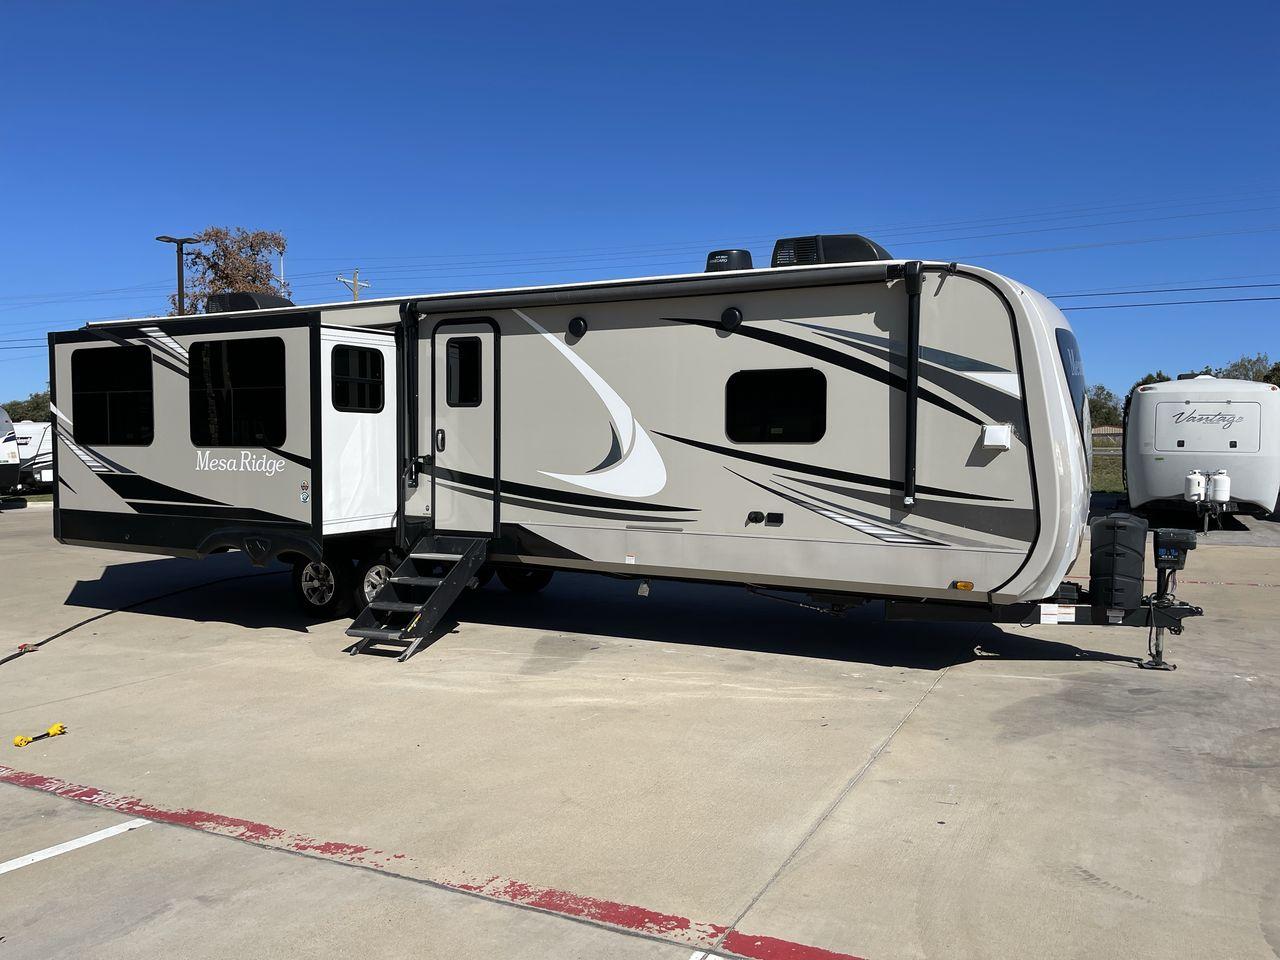 2022 HIGHLAND RIDGE MESA RIDGE 323RLS (58TBH0BT6N3) , Length: 37.8 ft | Dry Weight: 8,890 lbs | Gross Weight: 11,400 lbs | Slides: 3 transmission, located at 4319 N Main St, Cleburne, TX, 76033, (817) 678-5133, 32.385960, -97.391212 - The 2022 Highland Ridge Mesa Ridge 323RLS delivers luxury and comfort on the road. This travel trailer is 37.8 feet long and has three slides, which provide plenty of room for relaxation and enjoyment. The center island with twin sinks and a free-standing dinette provides convenience and functionali - Photo #23